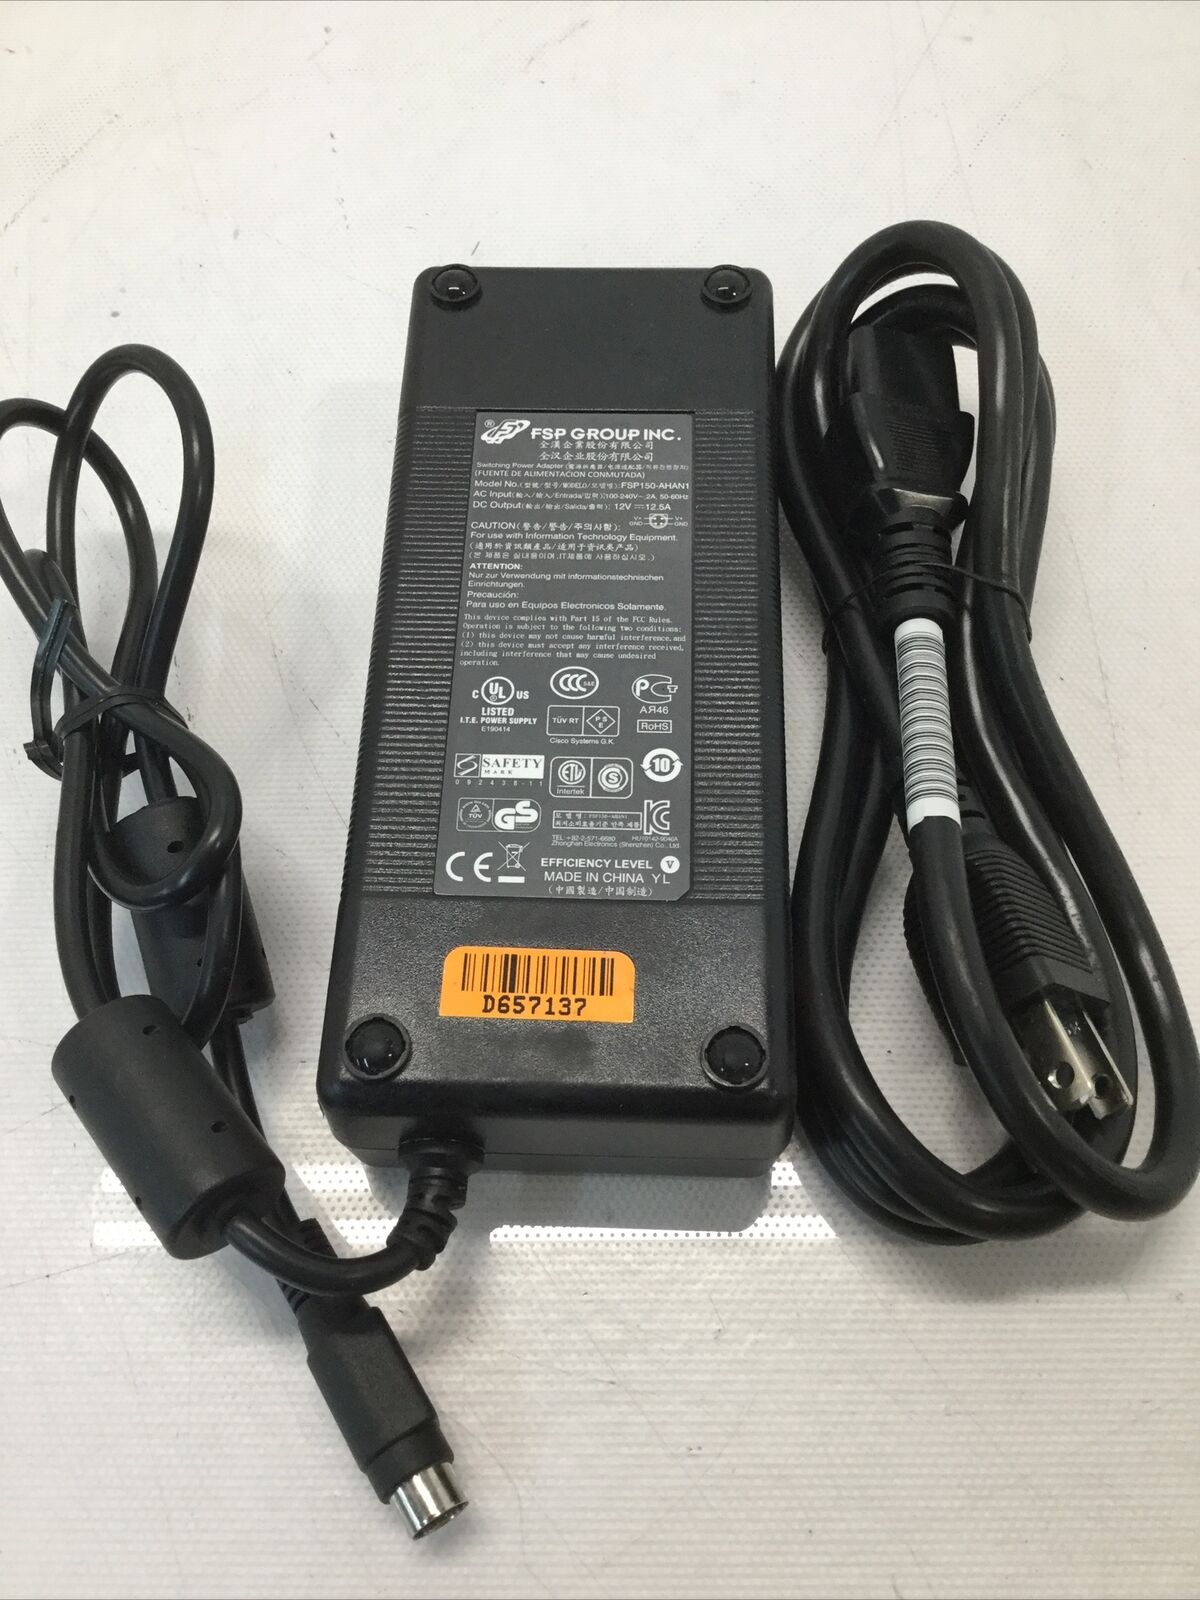 Original FSP Power Supply AC/DC Adapter FSP150-AHAN1 12V 12.5A V+ to GND 4-PIN Connection Split/Duplication 1:1 Type AC